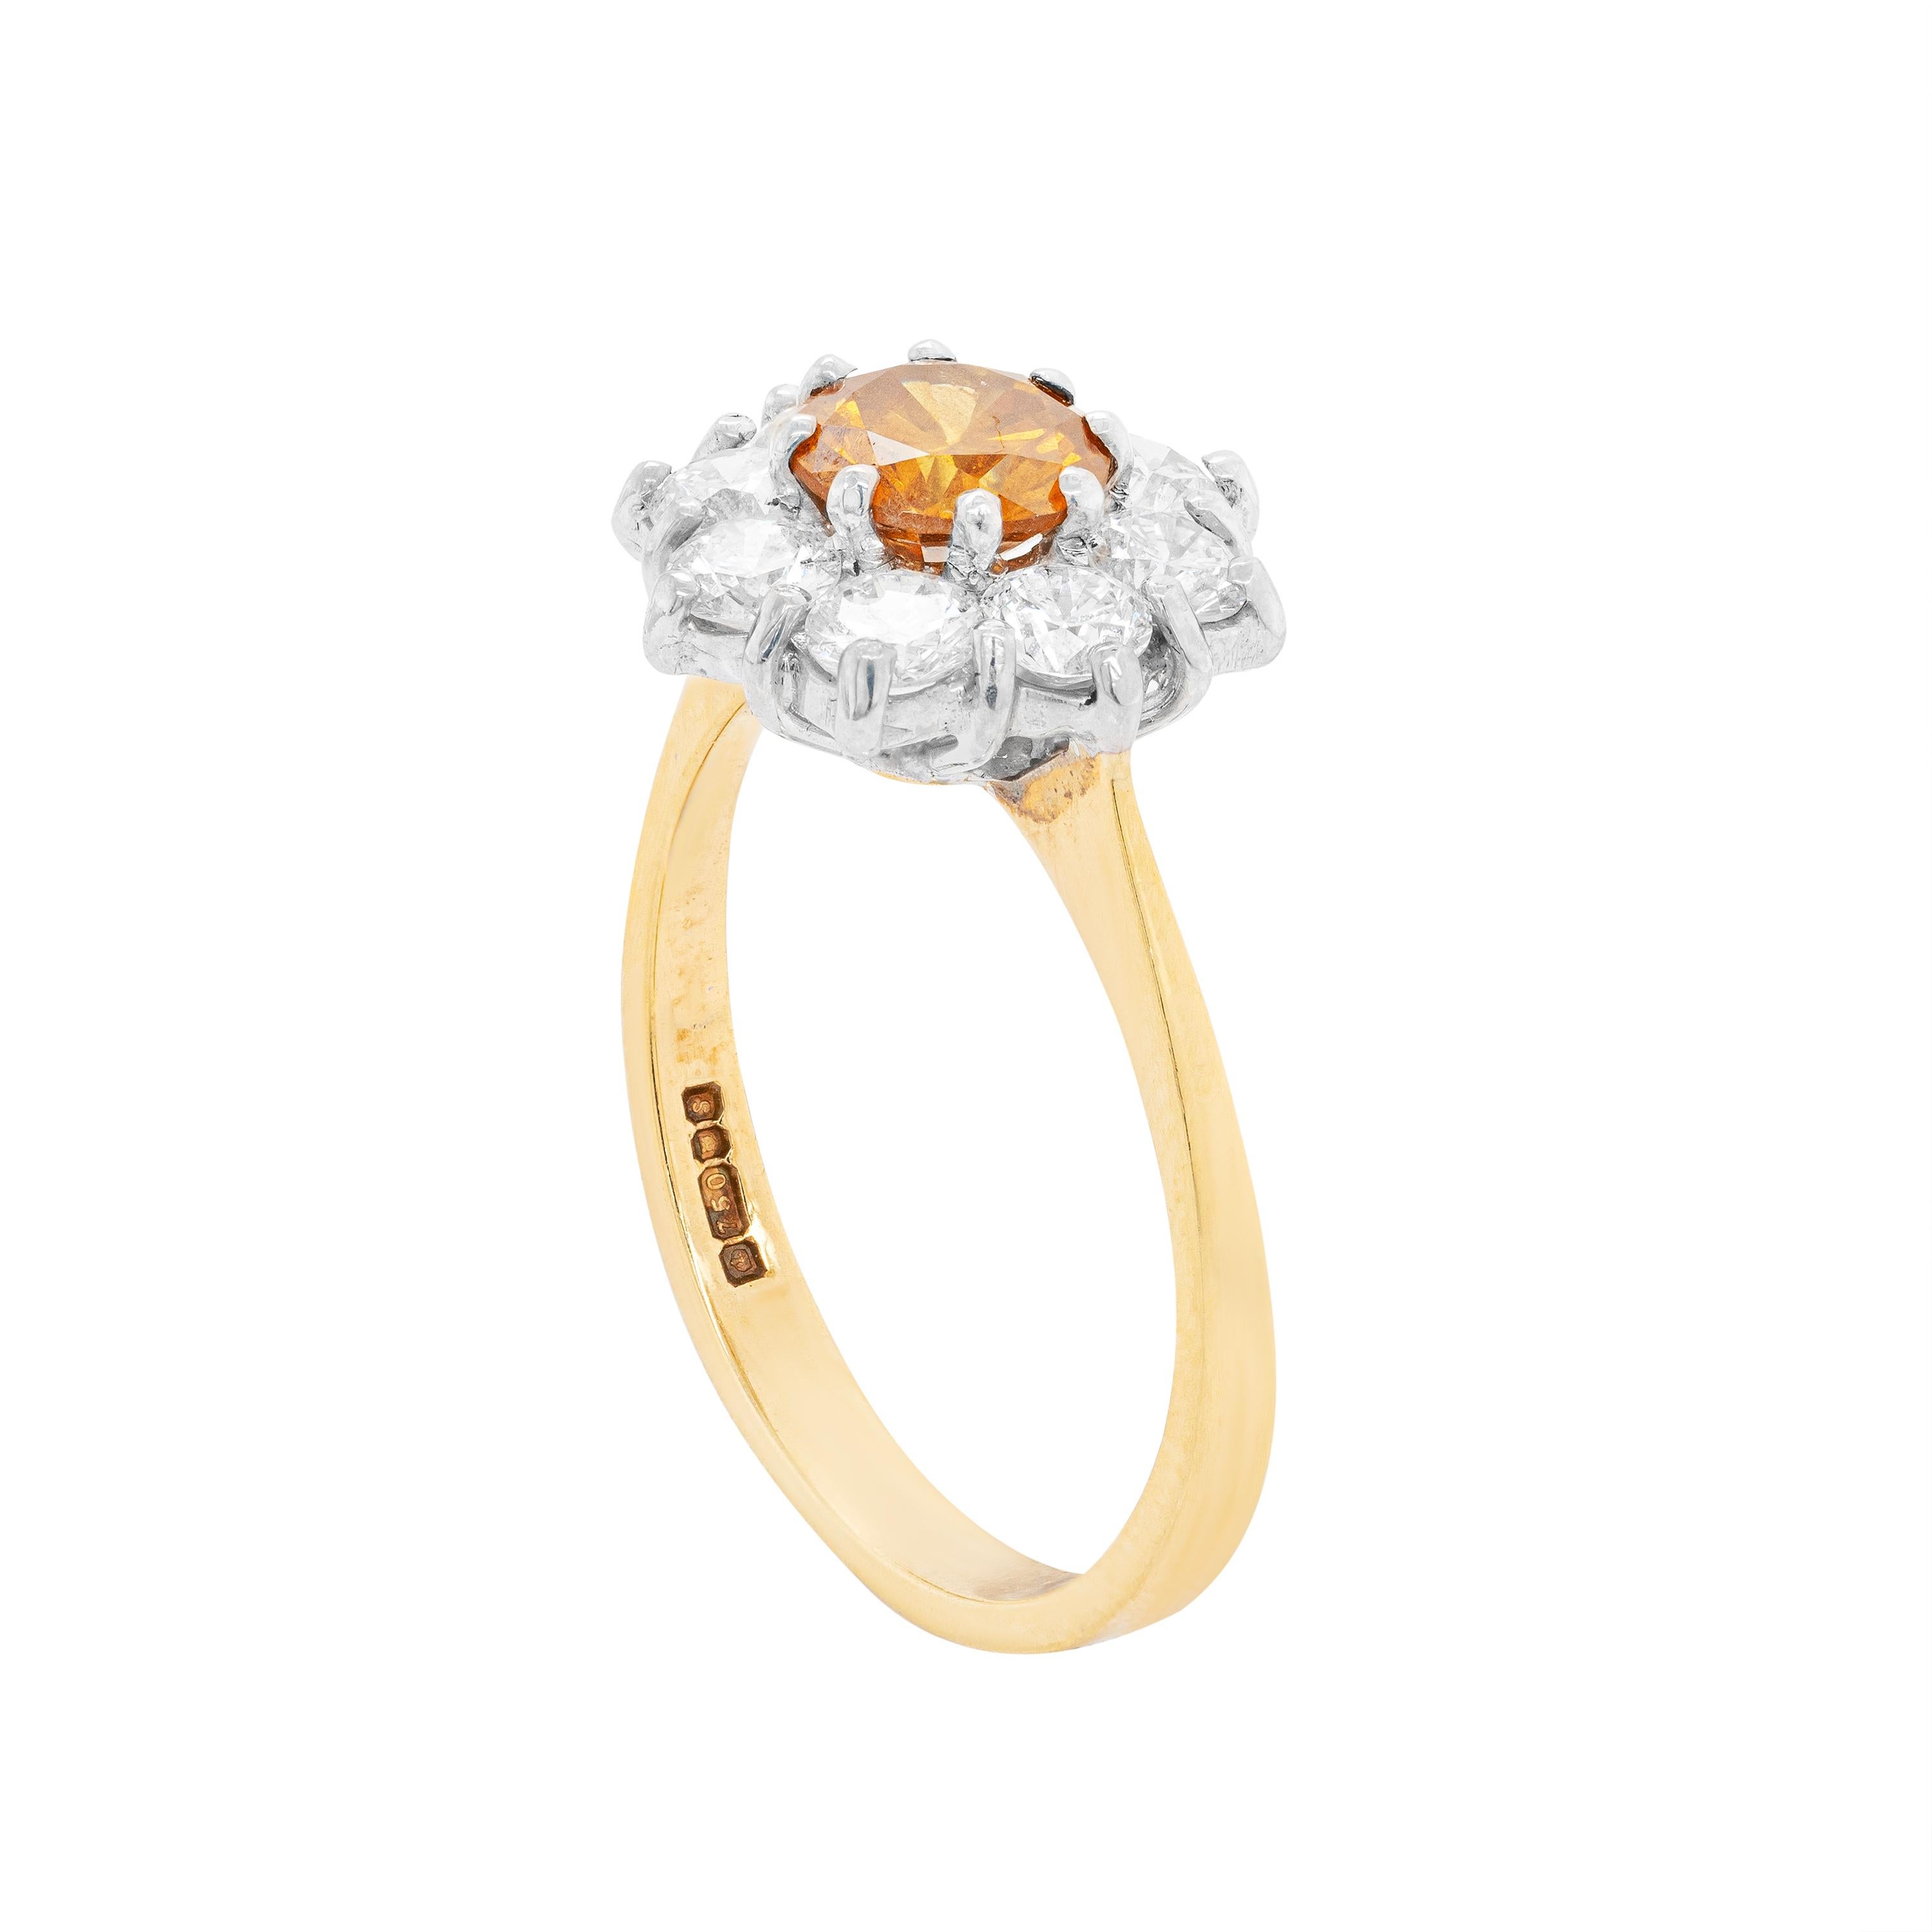 This timeless cluster engagement ring features a GIA certified 0.83ct natural fancy deep orange-yellow diamond centre, mounted in an 8 claw, open back setting. The vibrant stone is perfectly surrounded by eight fine quality round brilliant cut